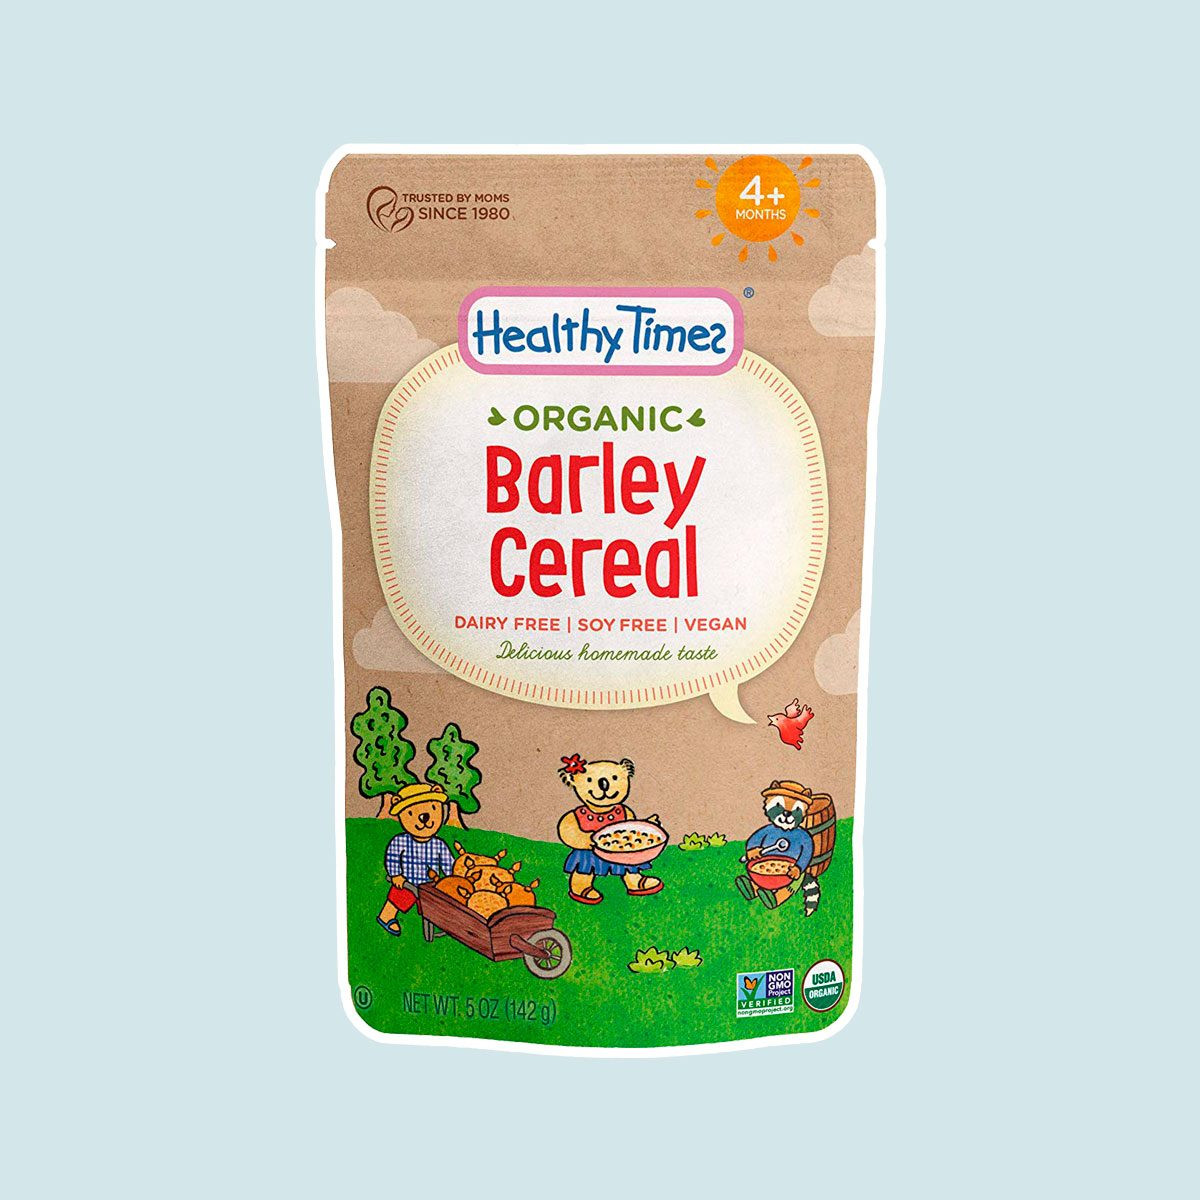 Barley Baby Cereal
 The Best Baby Food Cereal to Start With